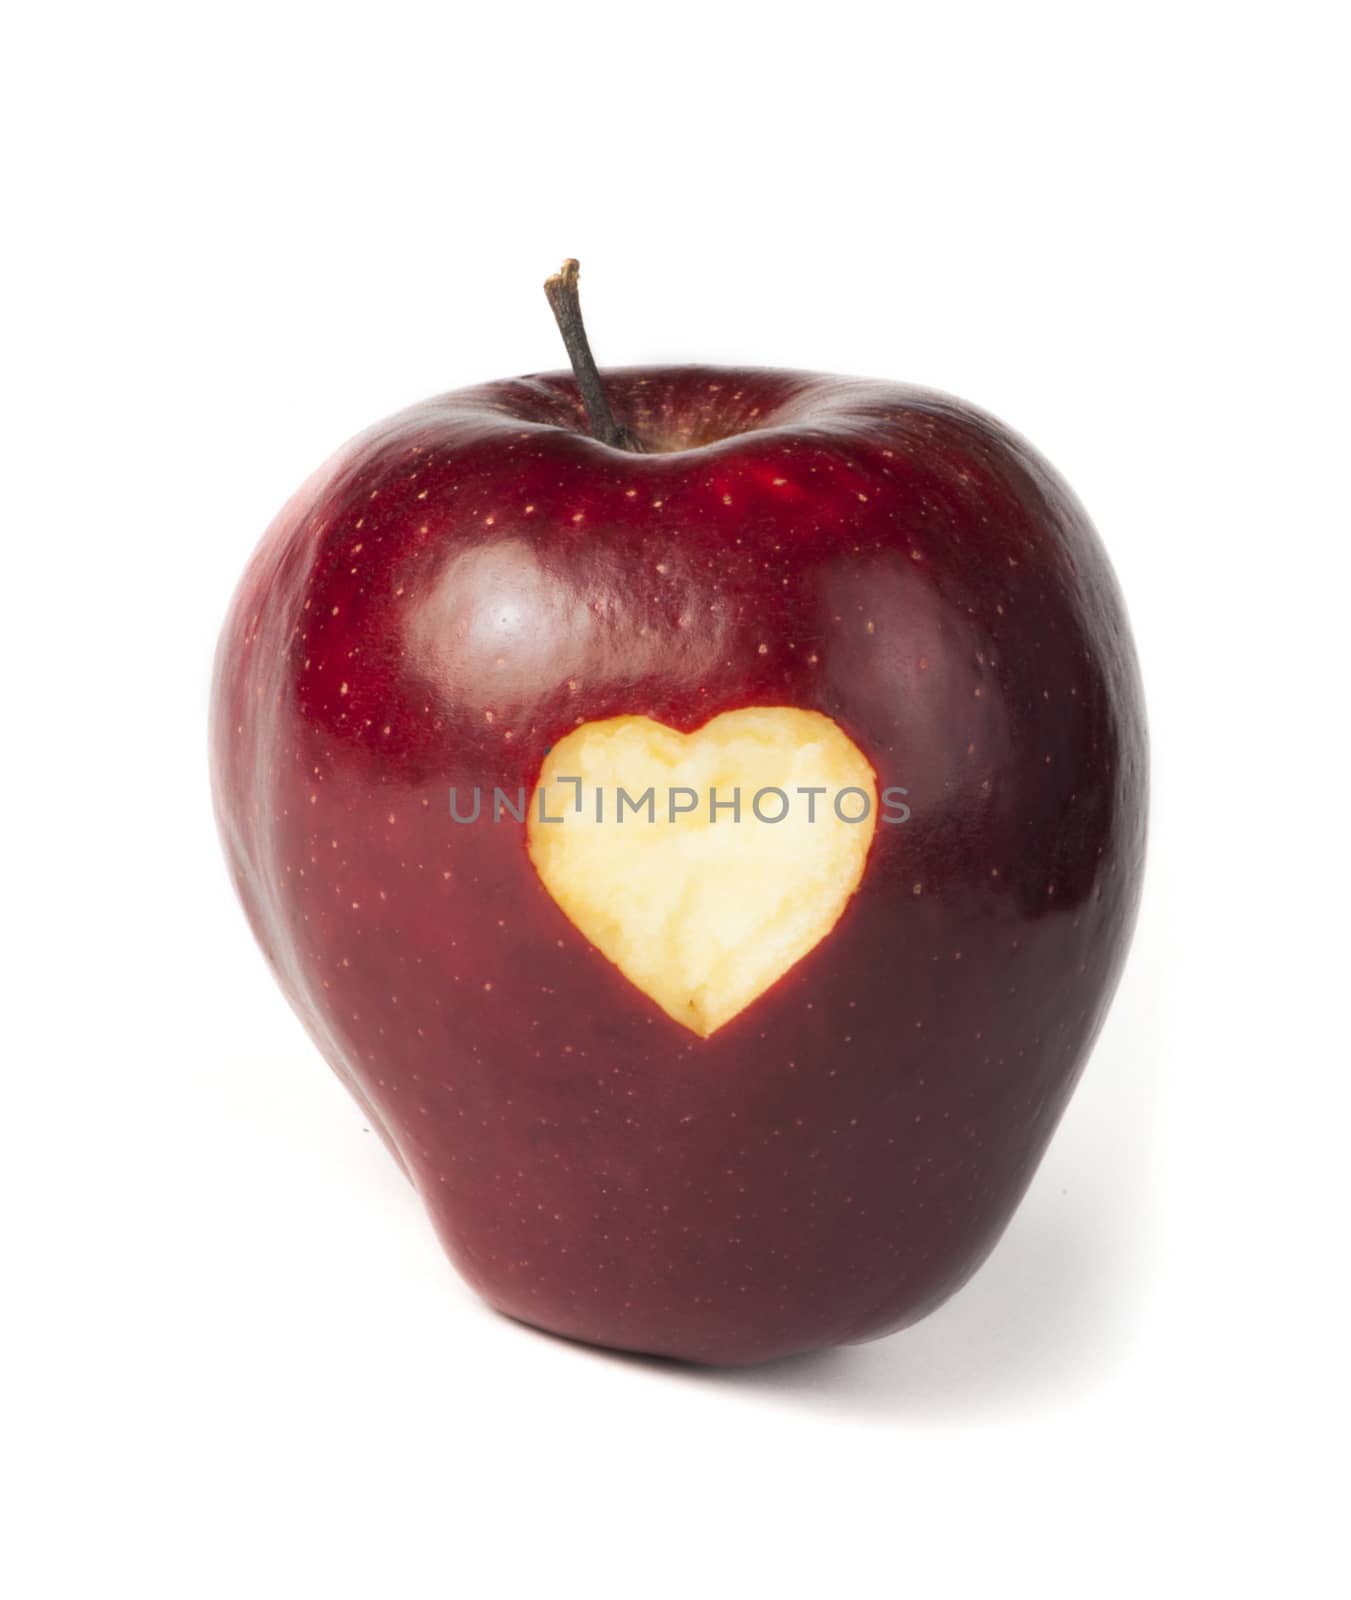 Heart shape closeup carved in red apple